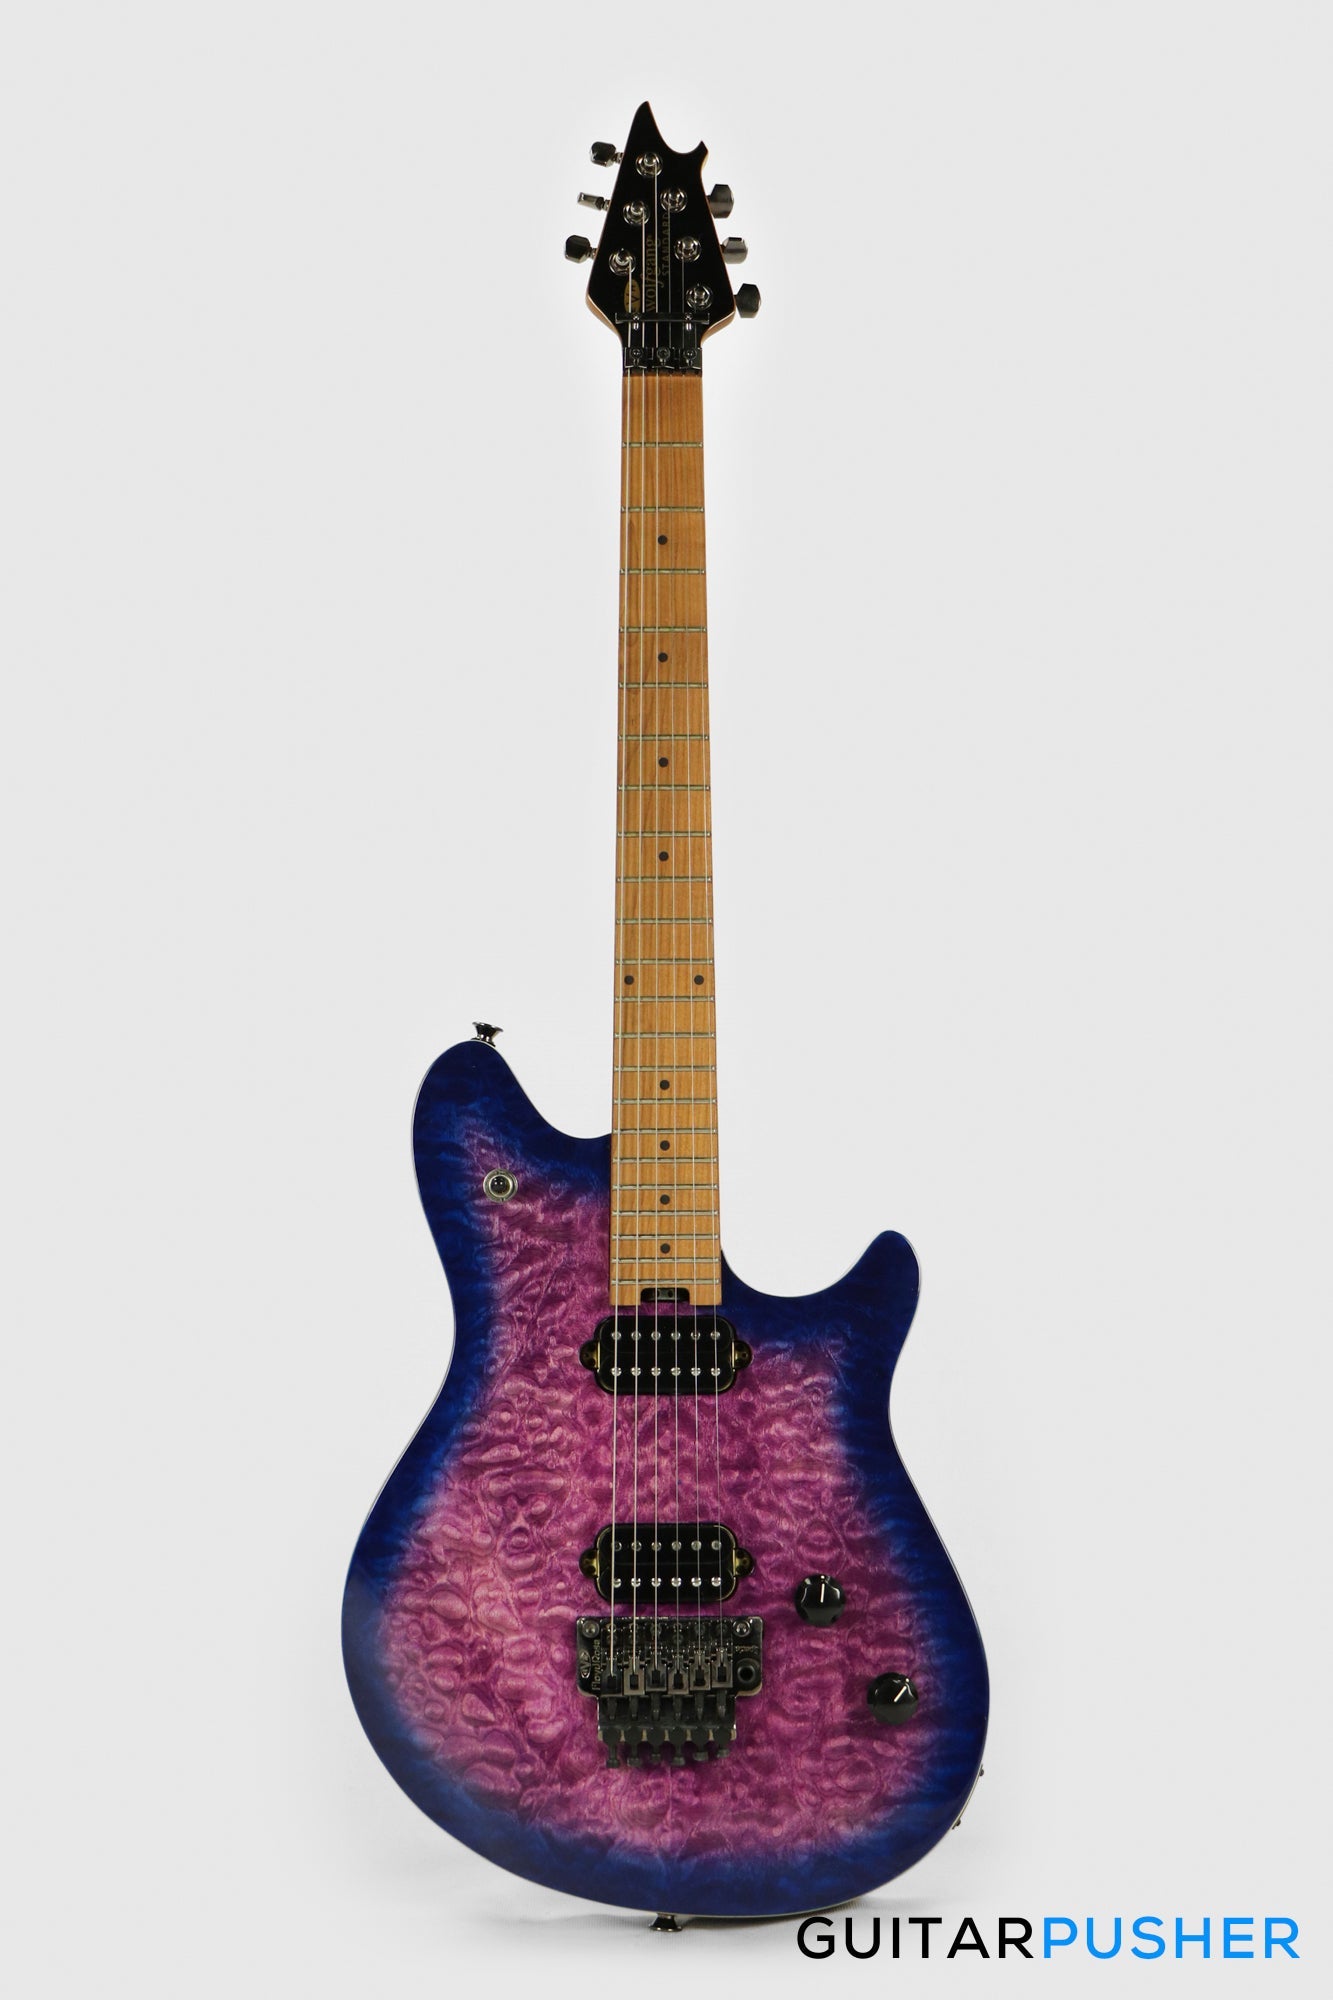 Wolfgang EVH WG QM (Quilted Maple) Standard Electric Guitar - Northern Lights